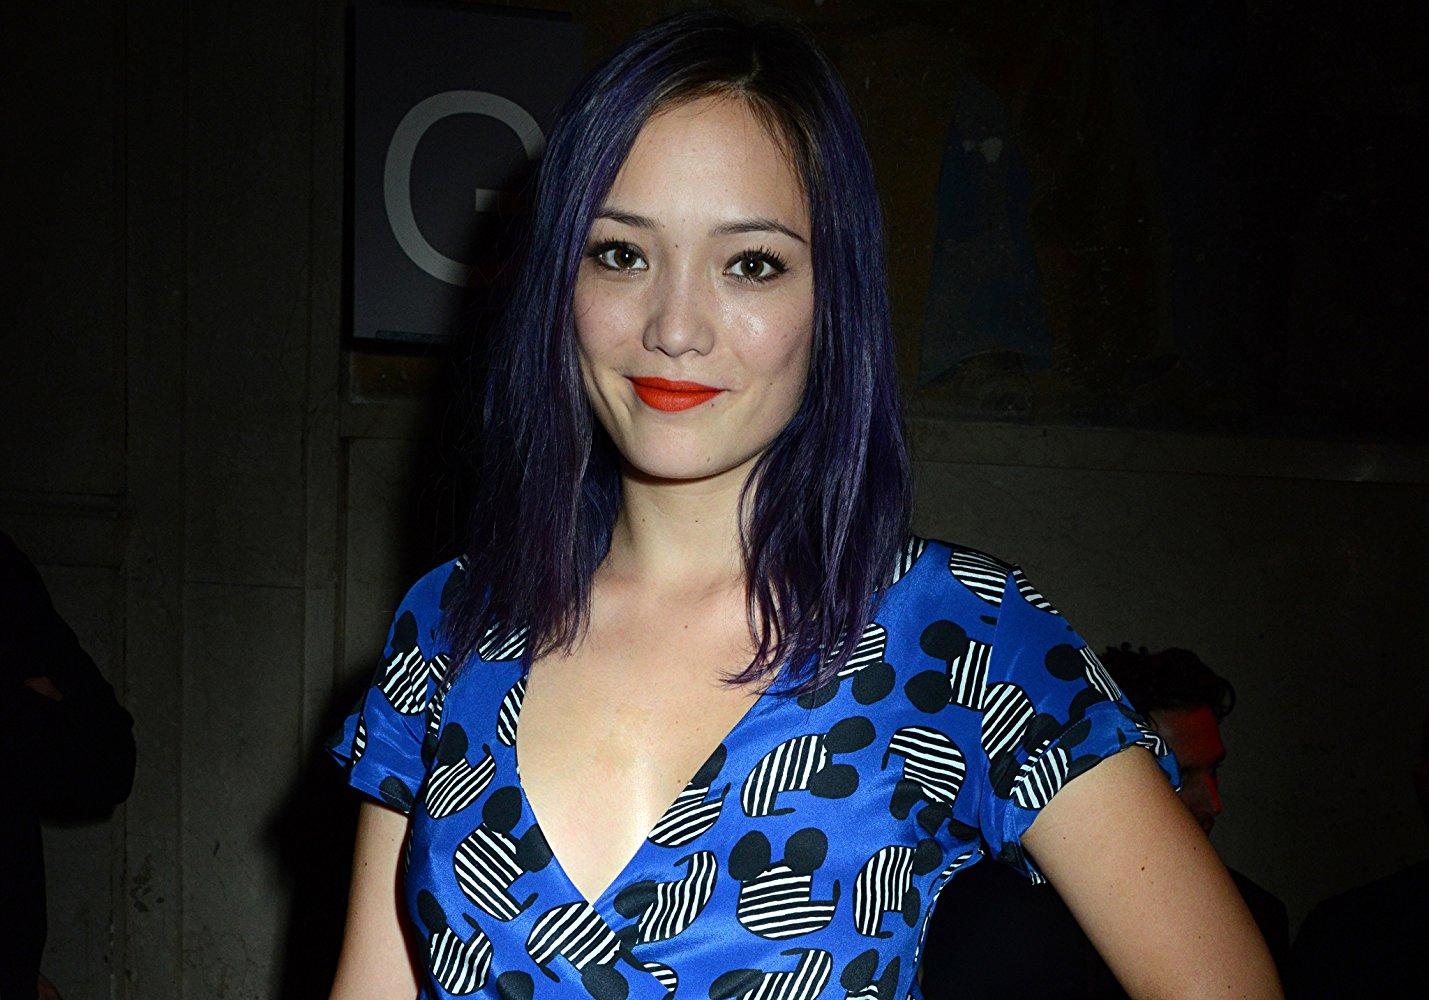 Hot Picture Of Pom Klementieff Who Plays Mantis In Marvel